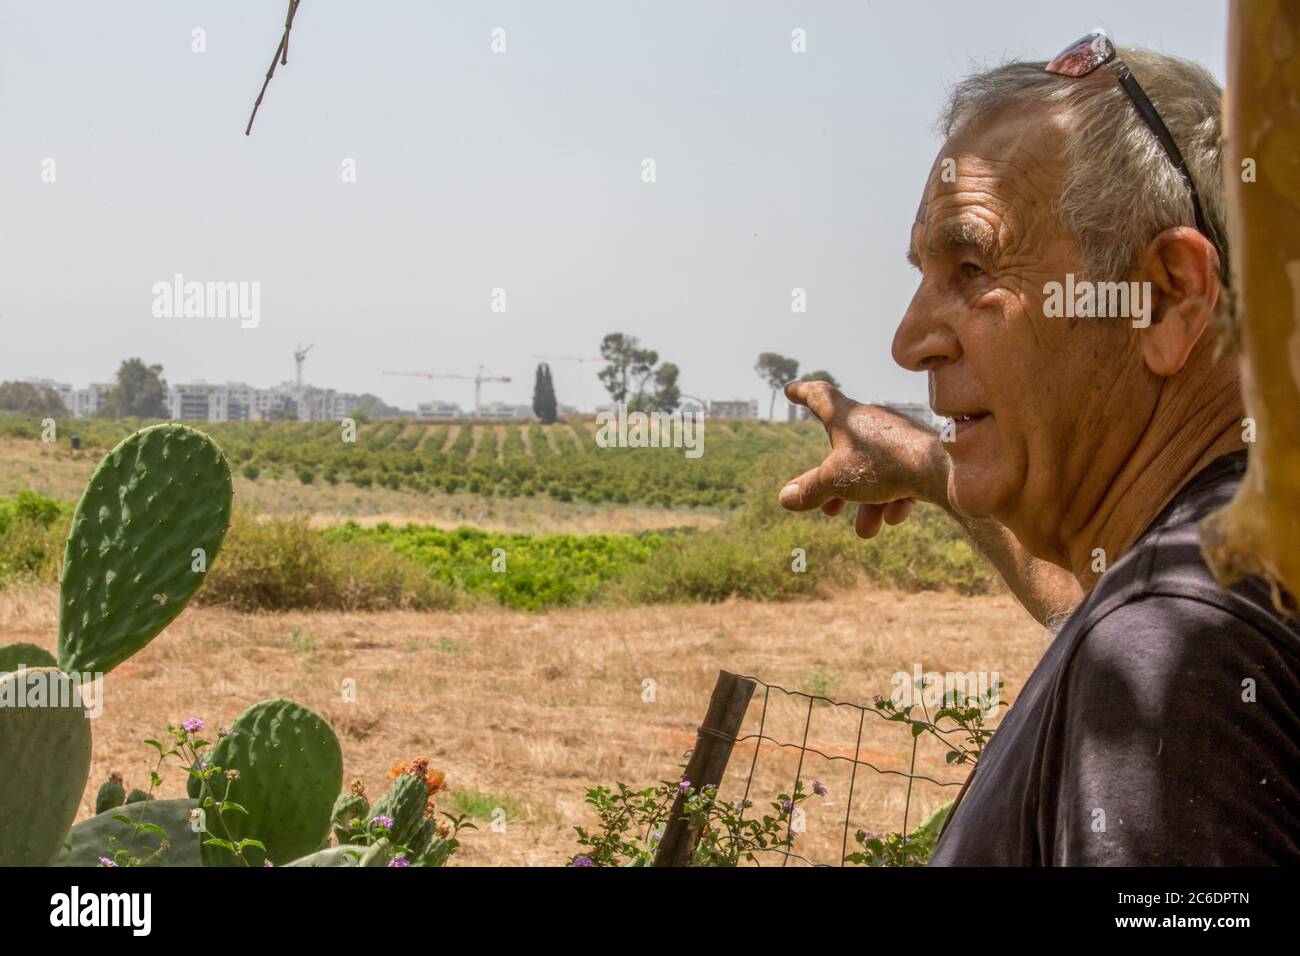 urban development is creeping up and consuming arable land. The farmer points to the new city being built near his fields. Photographed in Haniel [a m Stock Photo